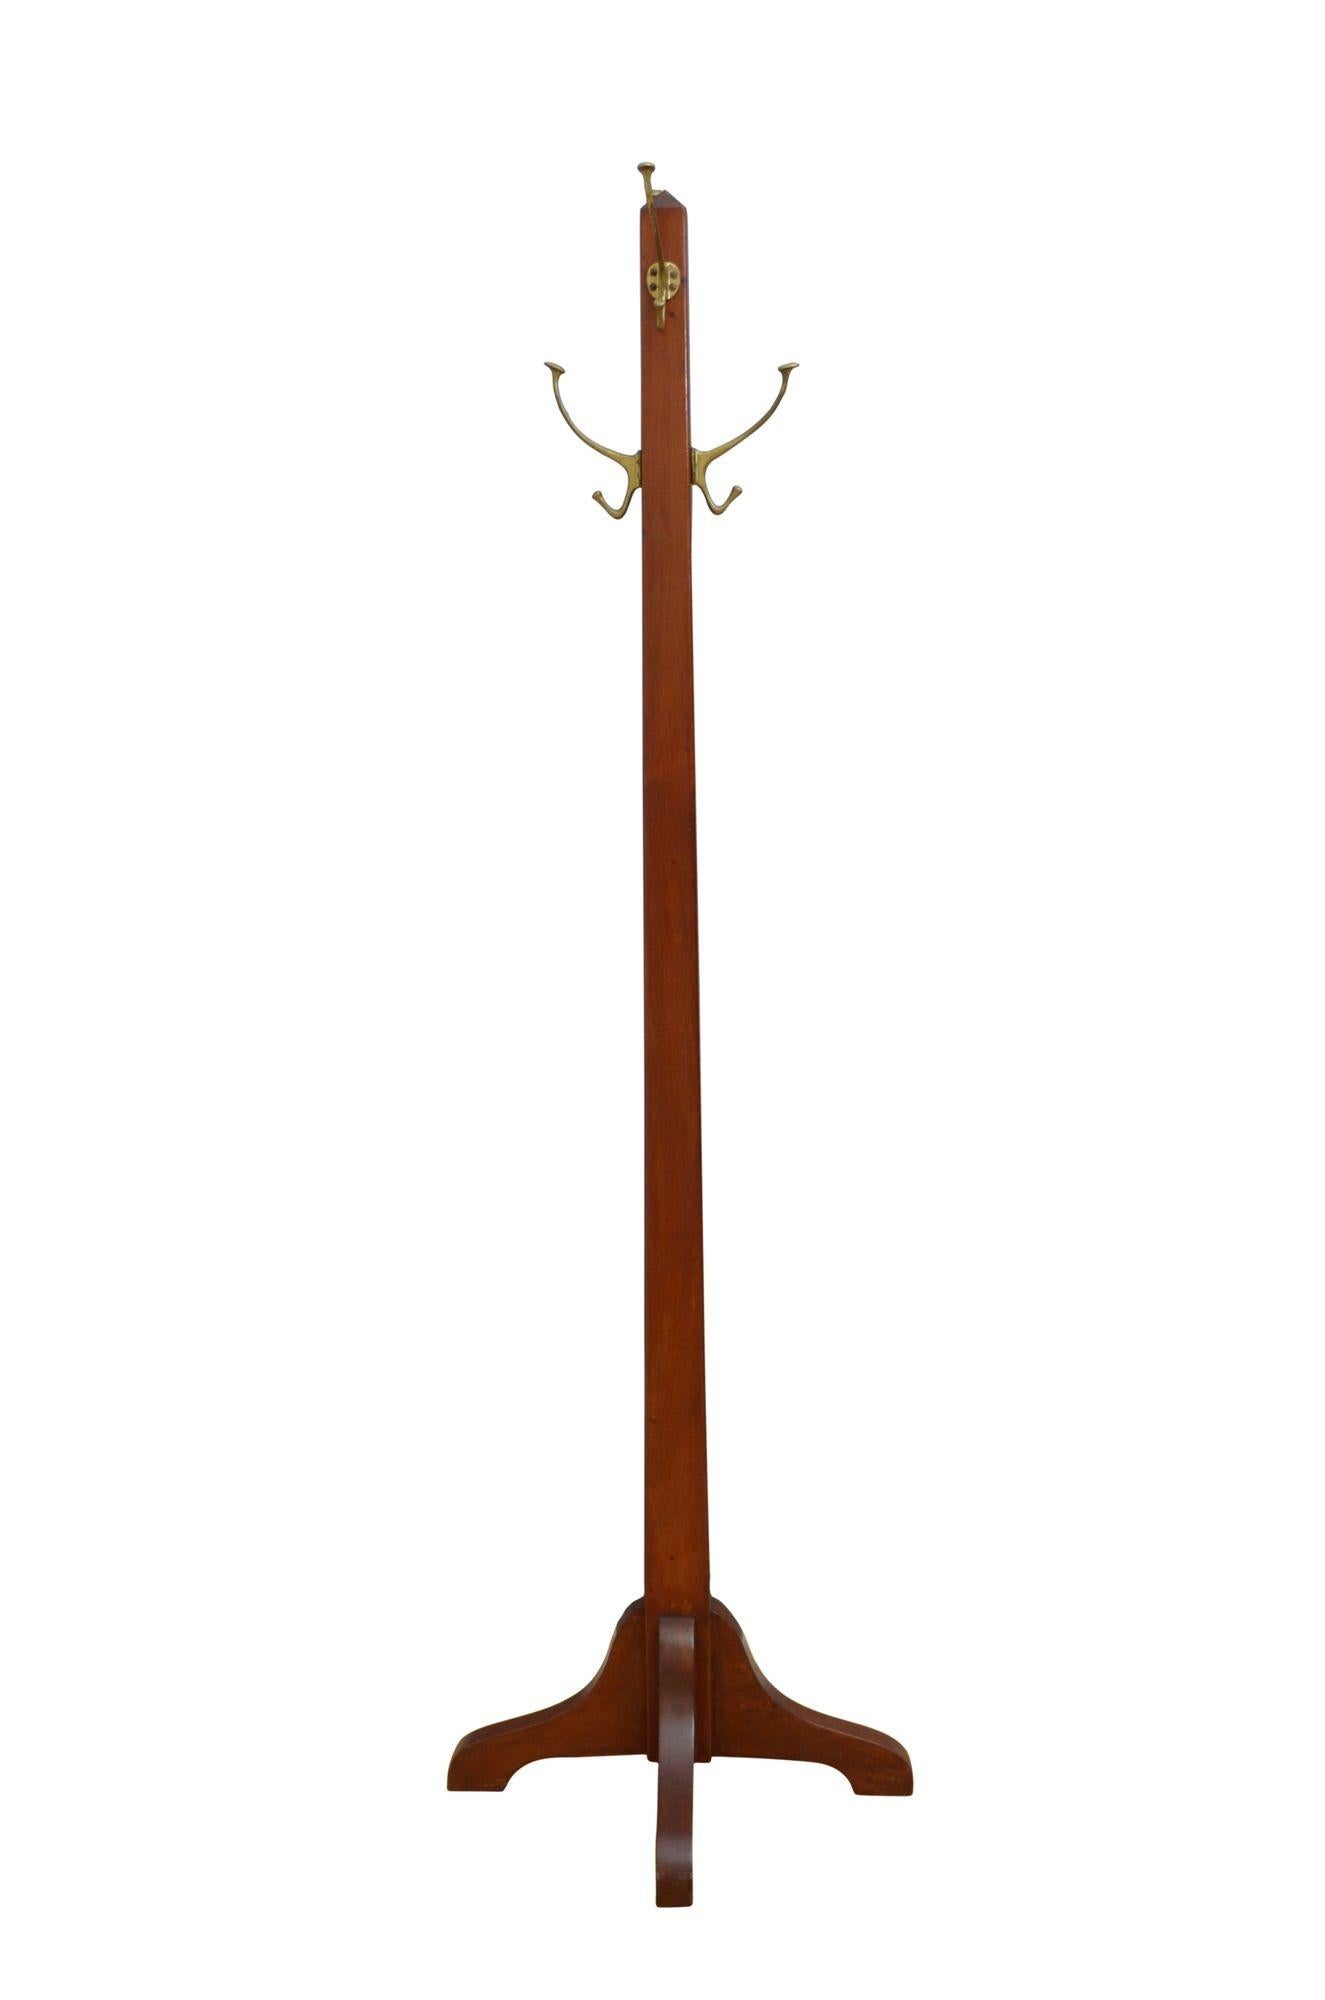 P0281 Arts and Crafts solid mahogany hall stand / hat stand with four original brass double hooks on solid mahogany tapered upright terminating in four shaped and downswept legs. Perfect for small spaces. This antique coat rack retains its original